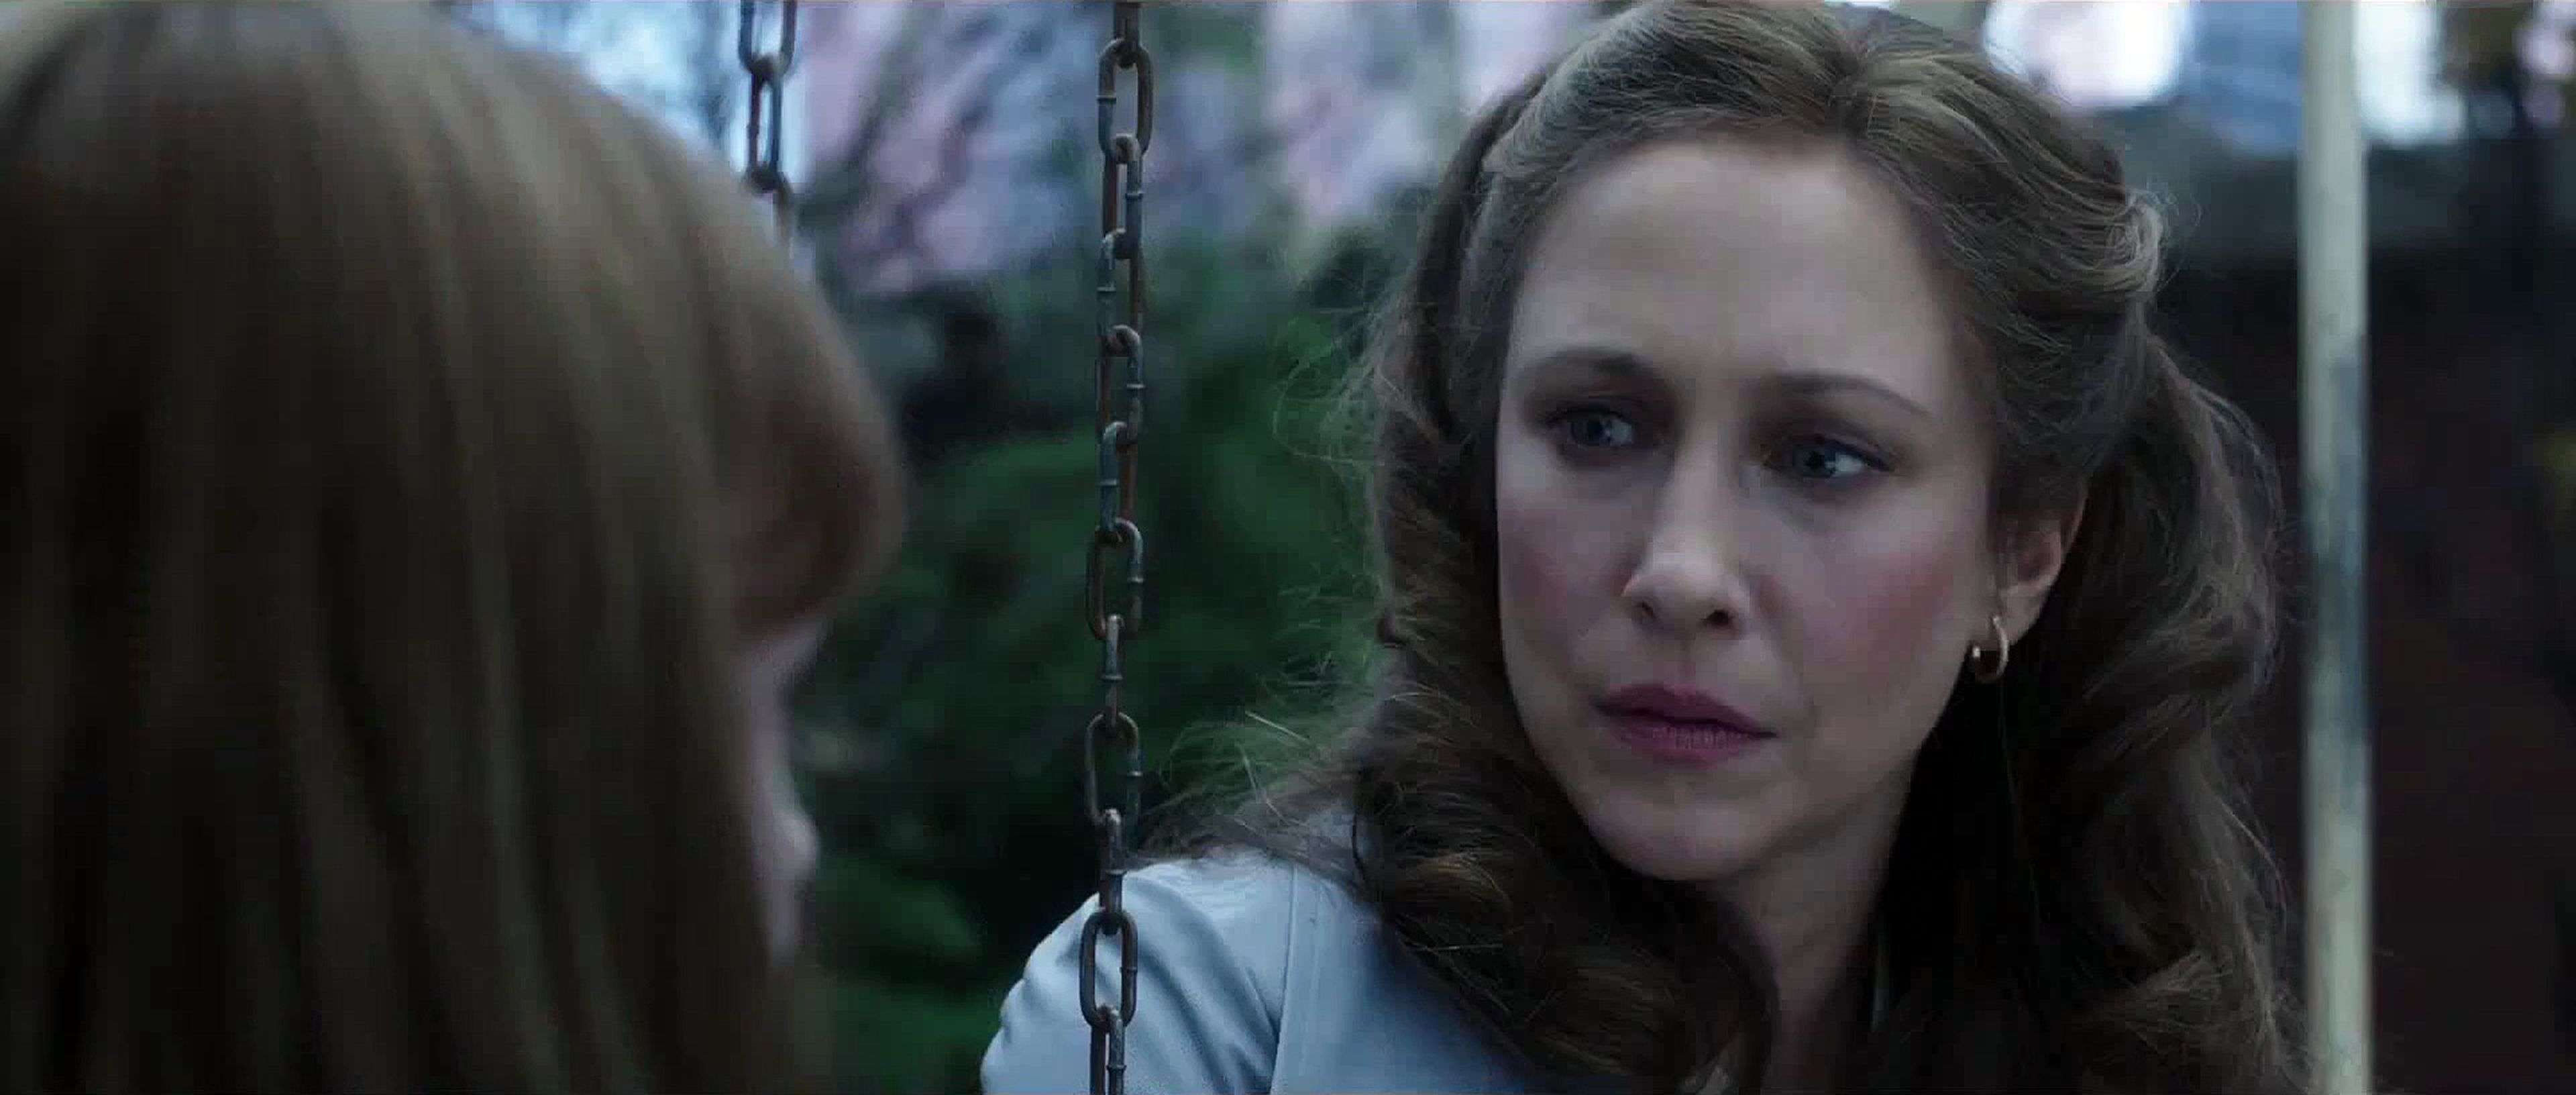 Tráiler de The Conjuring: The Enfield Poltergeist